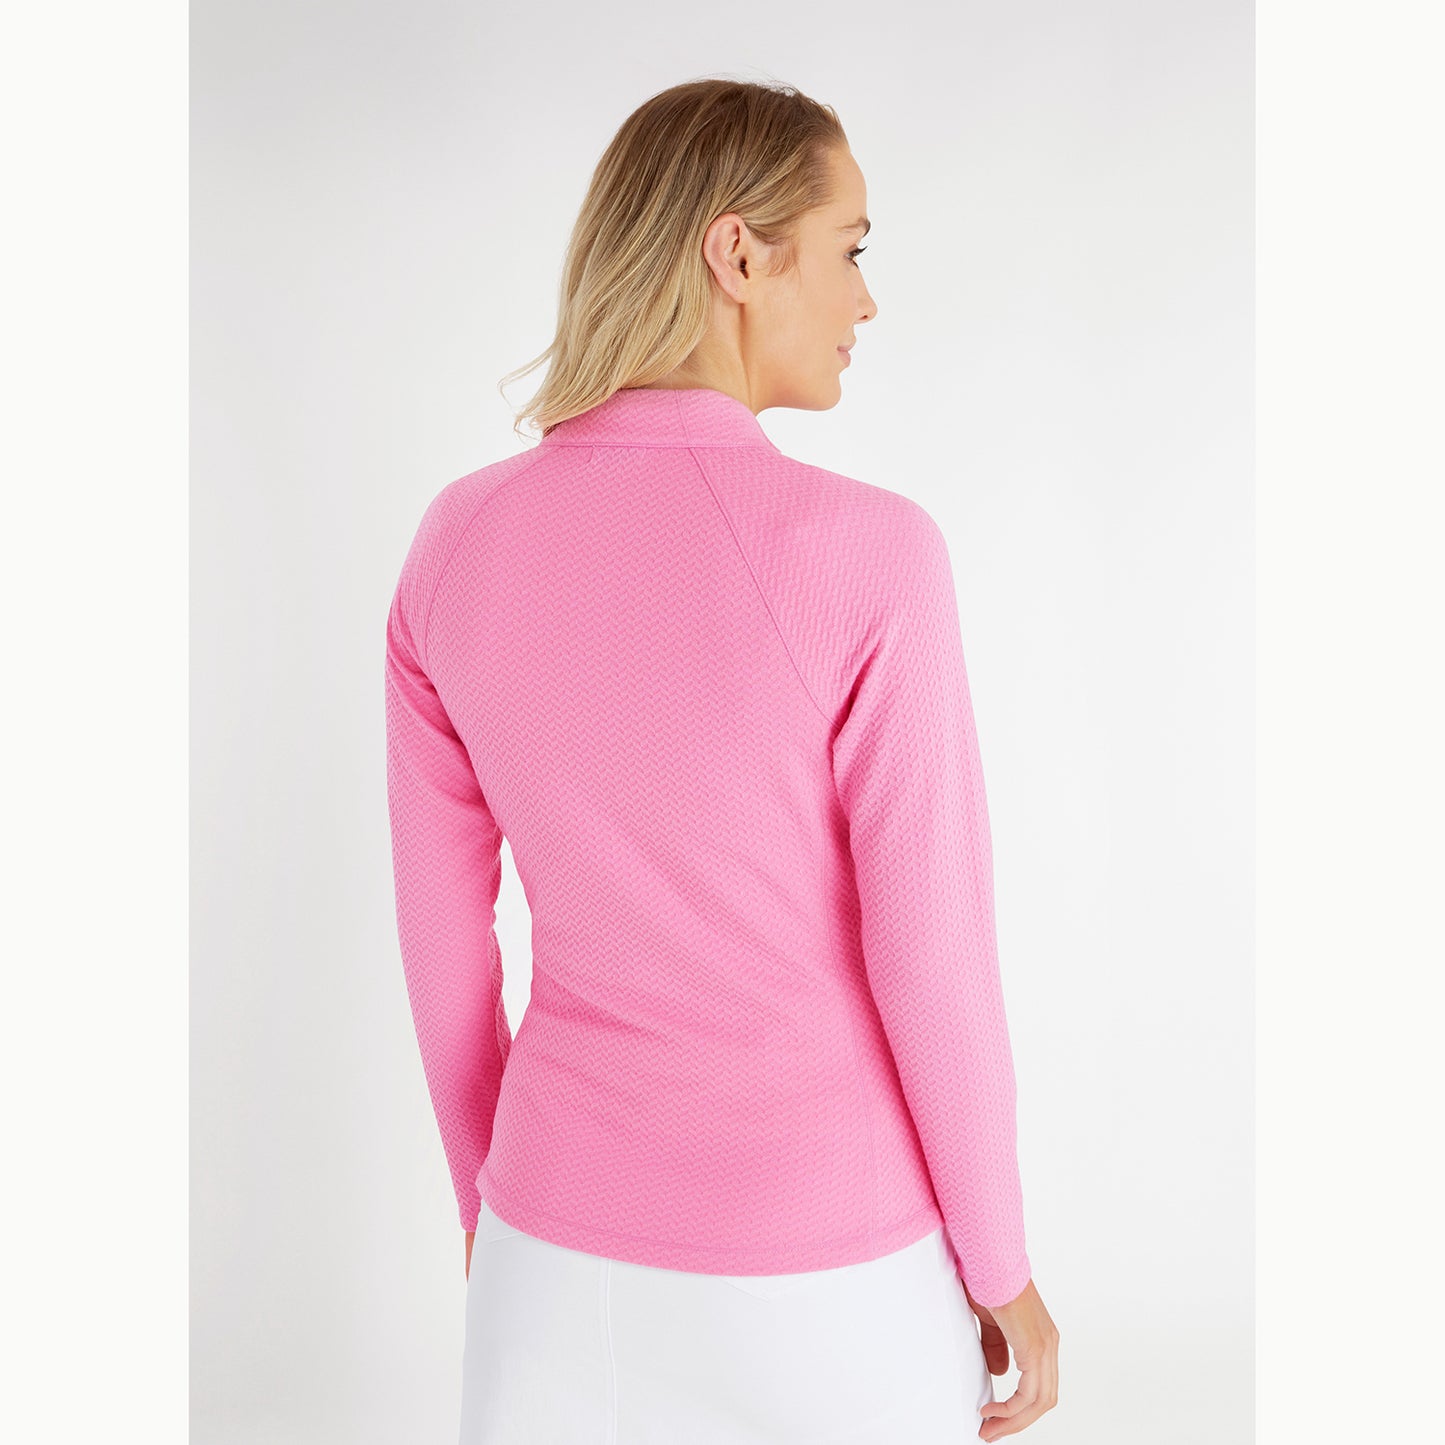 Green Lamb Ladies Molly Textured Zip Neck Top in Candy - Last One Size 8 Only Left